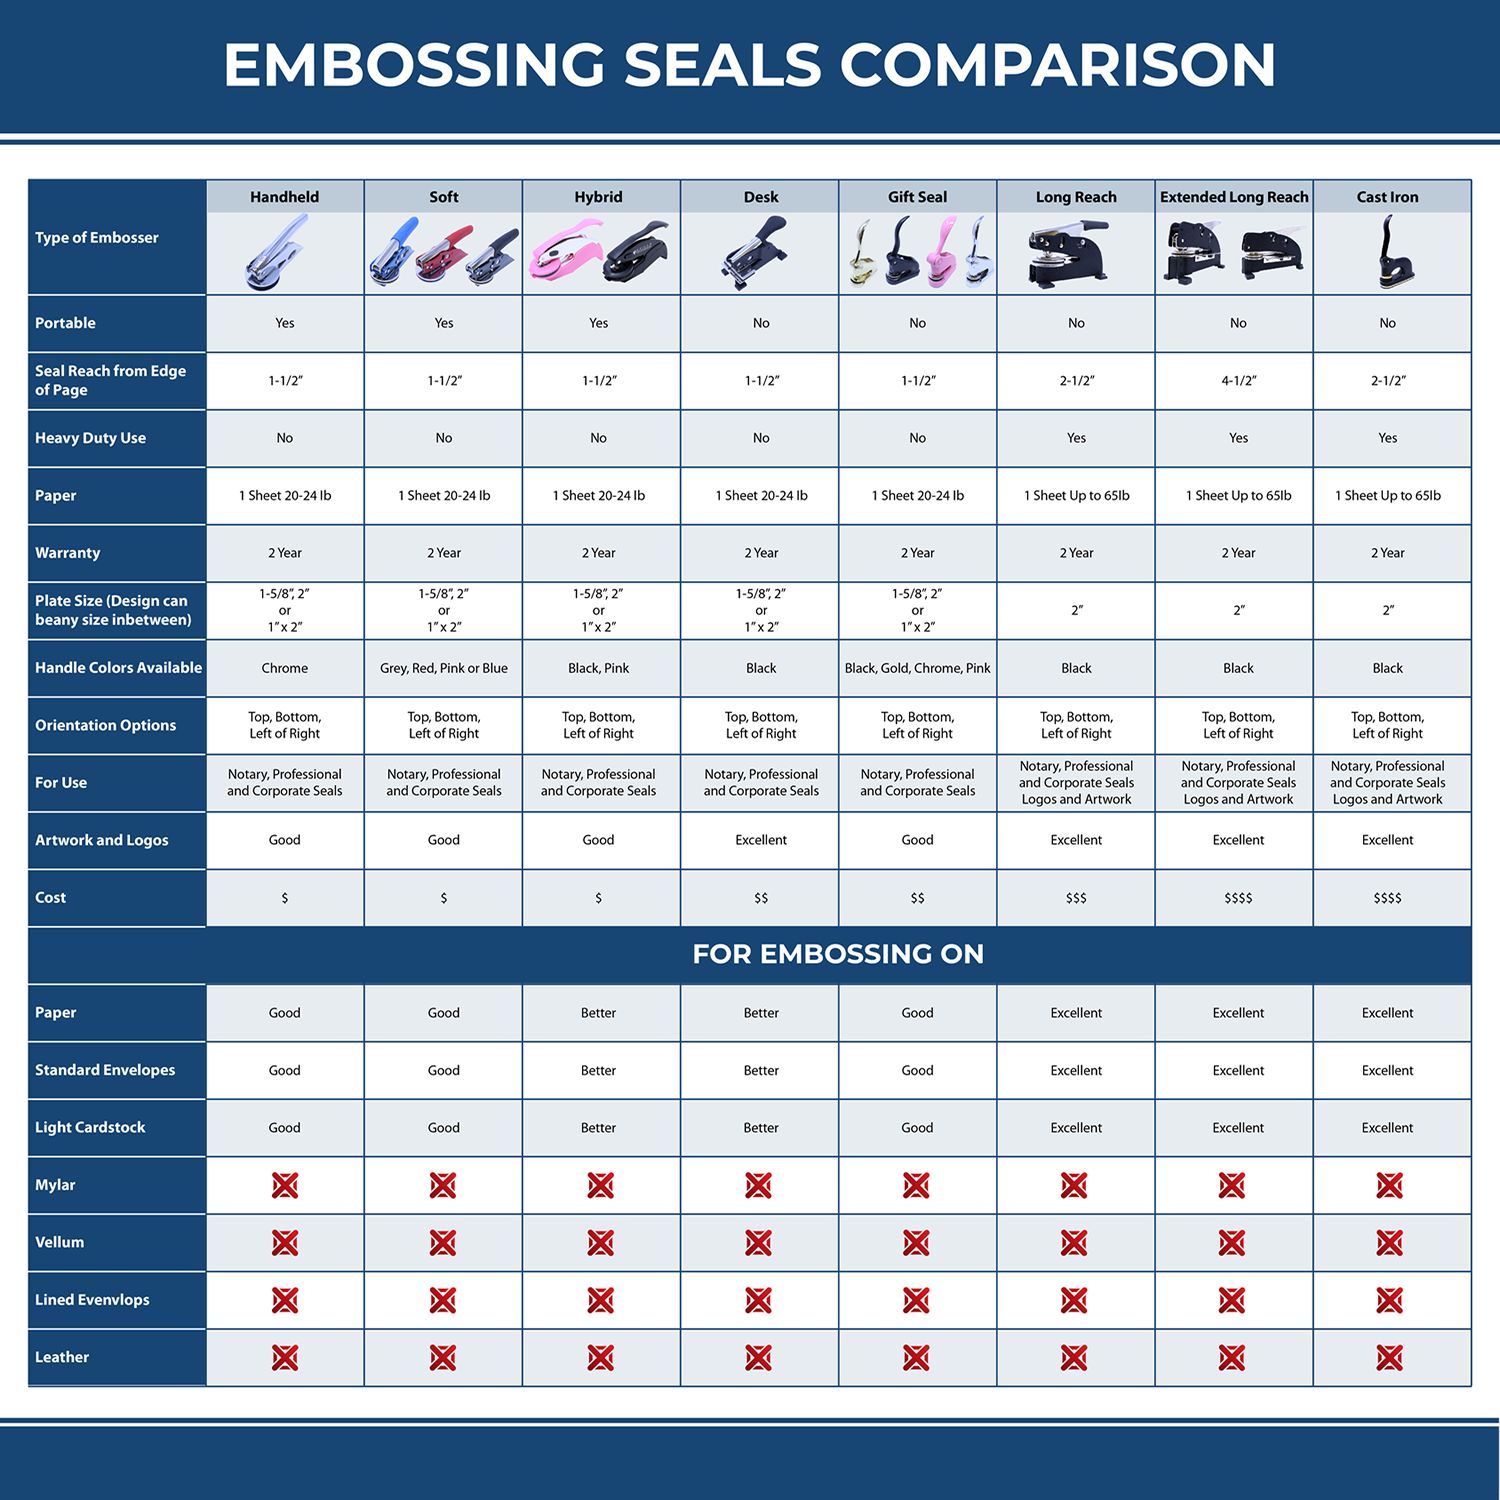 A comparison chart for the different types of mount models available for the Kentucky Long Reach Landscape Architect Embossing Stamp.